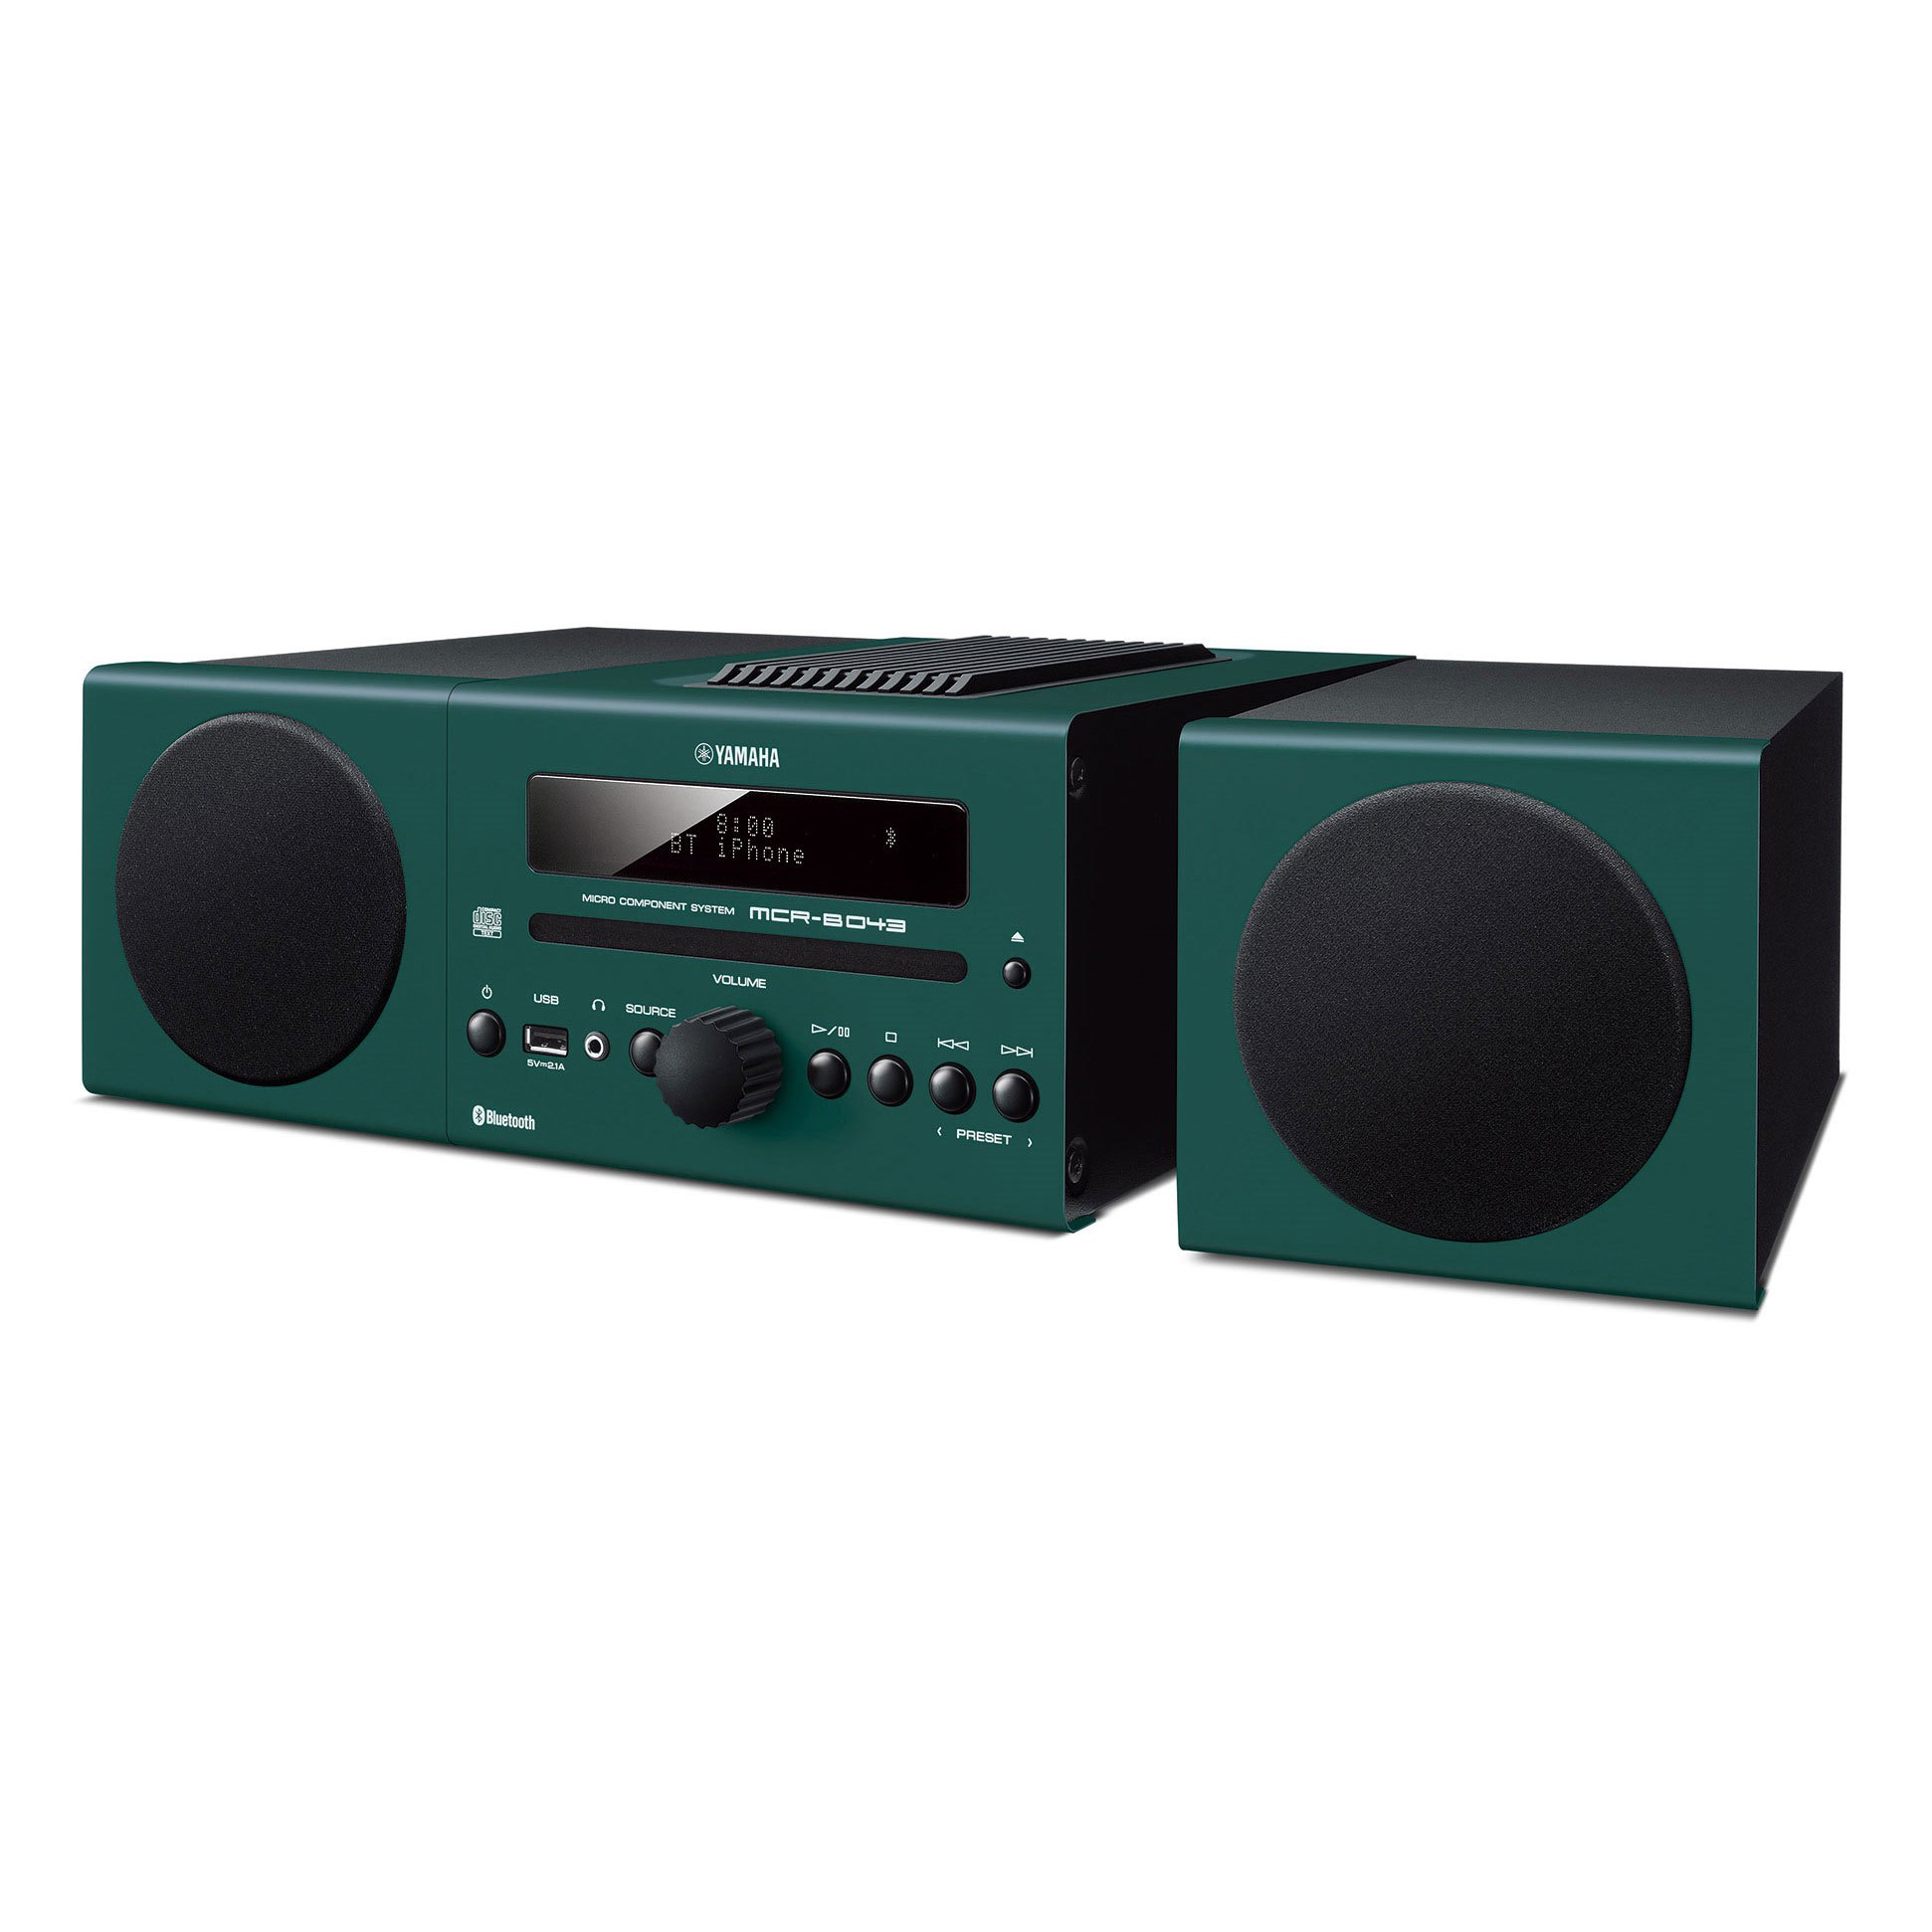 MCR-B043 - Overview - HiFi Systems - Audio & Visual - Products 